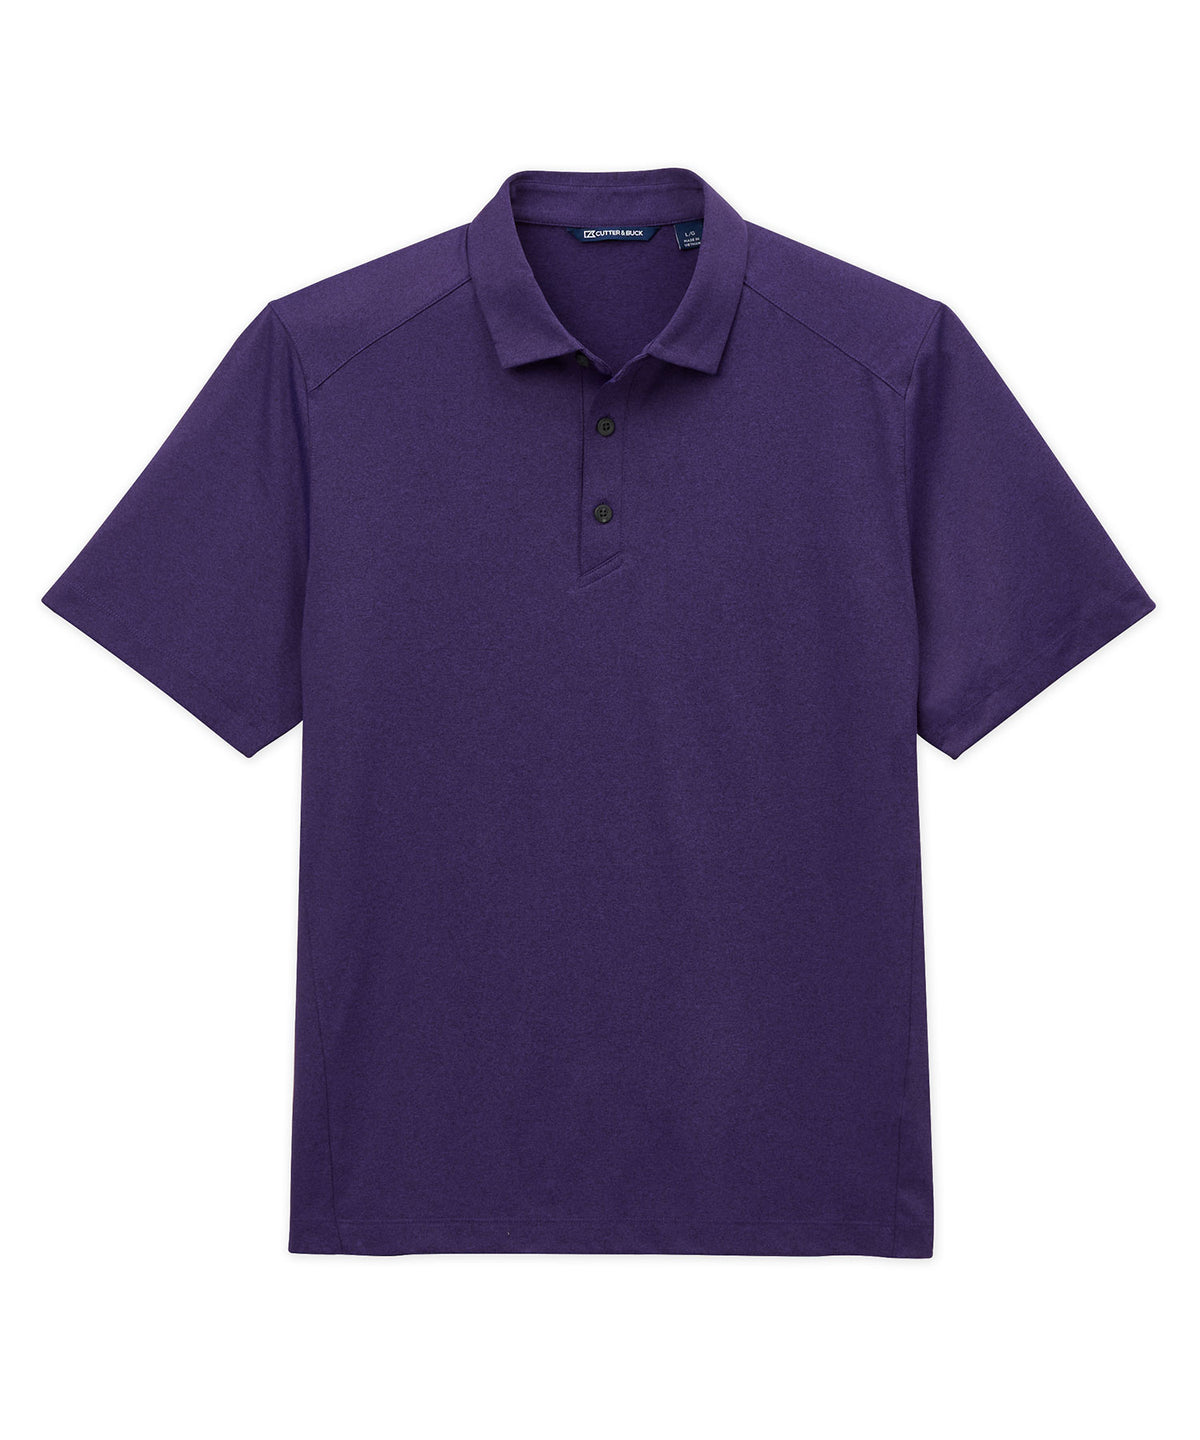 Cutter & Buck Forge Eco Stretch Recycled Polo, Men's Big & Tall